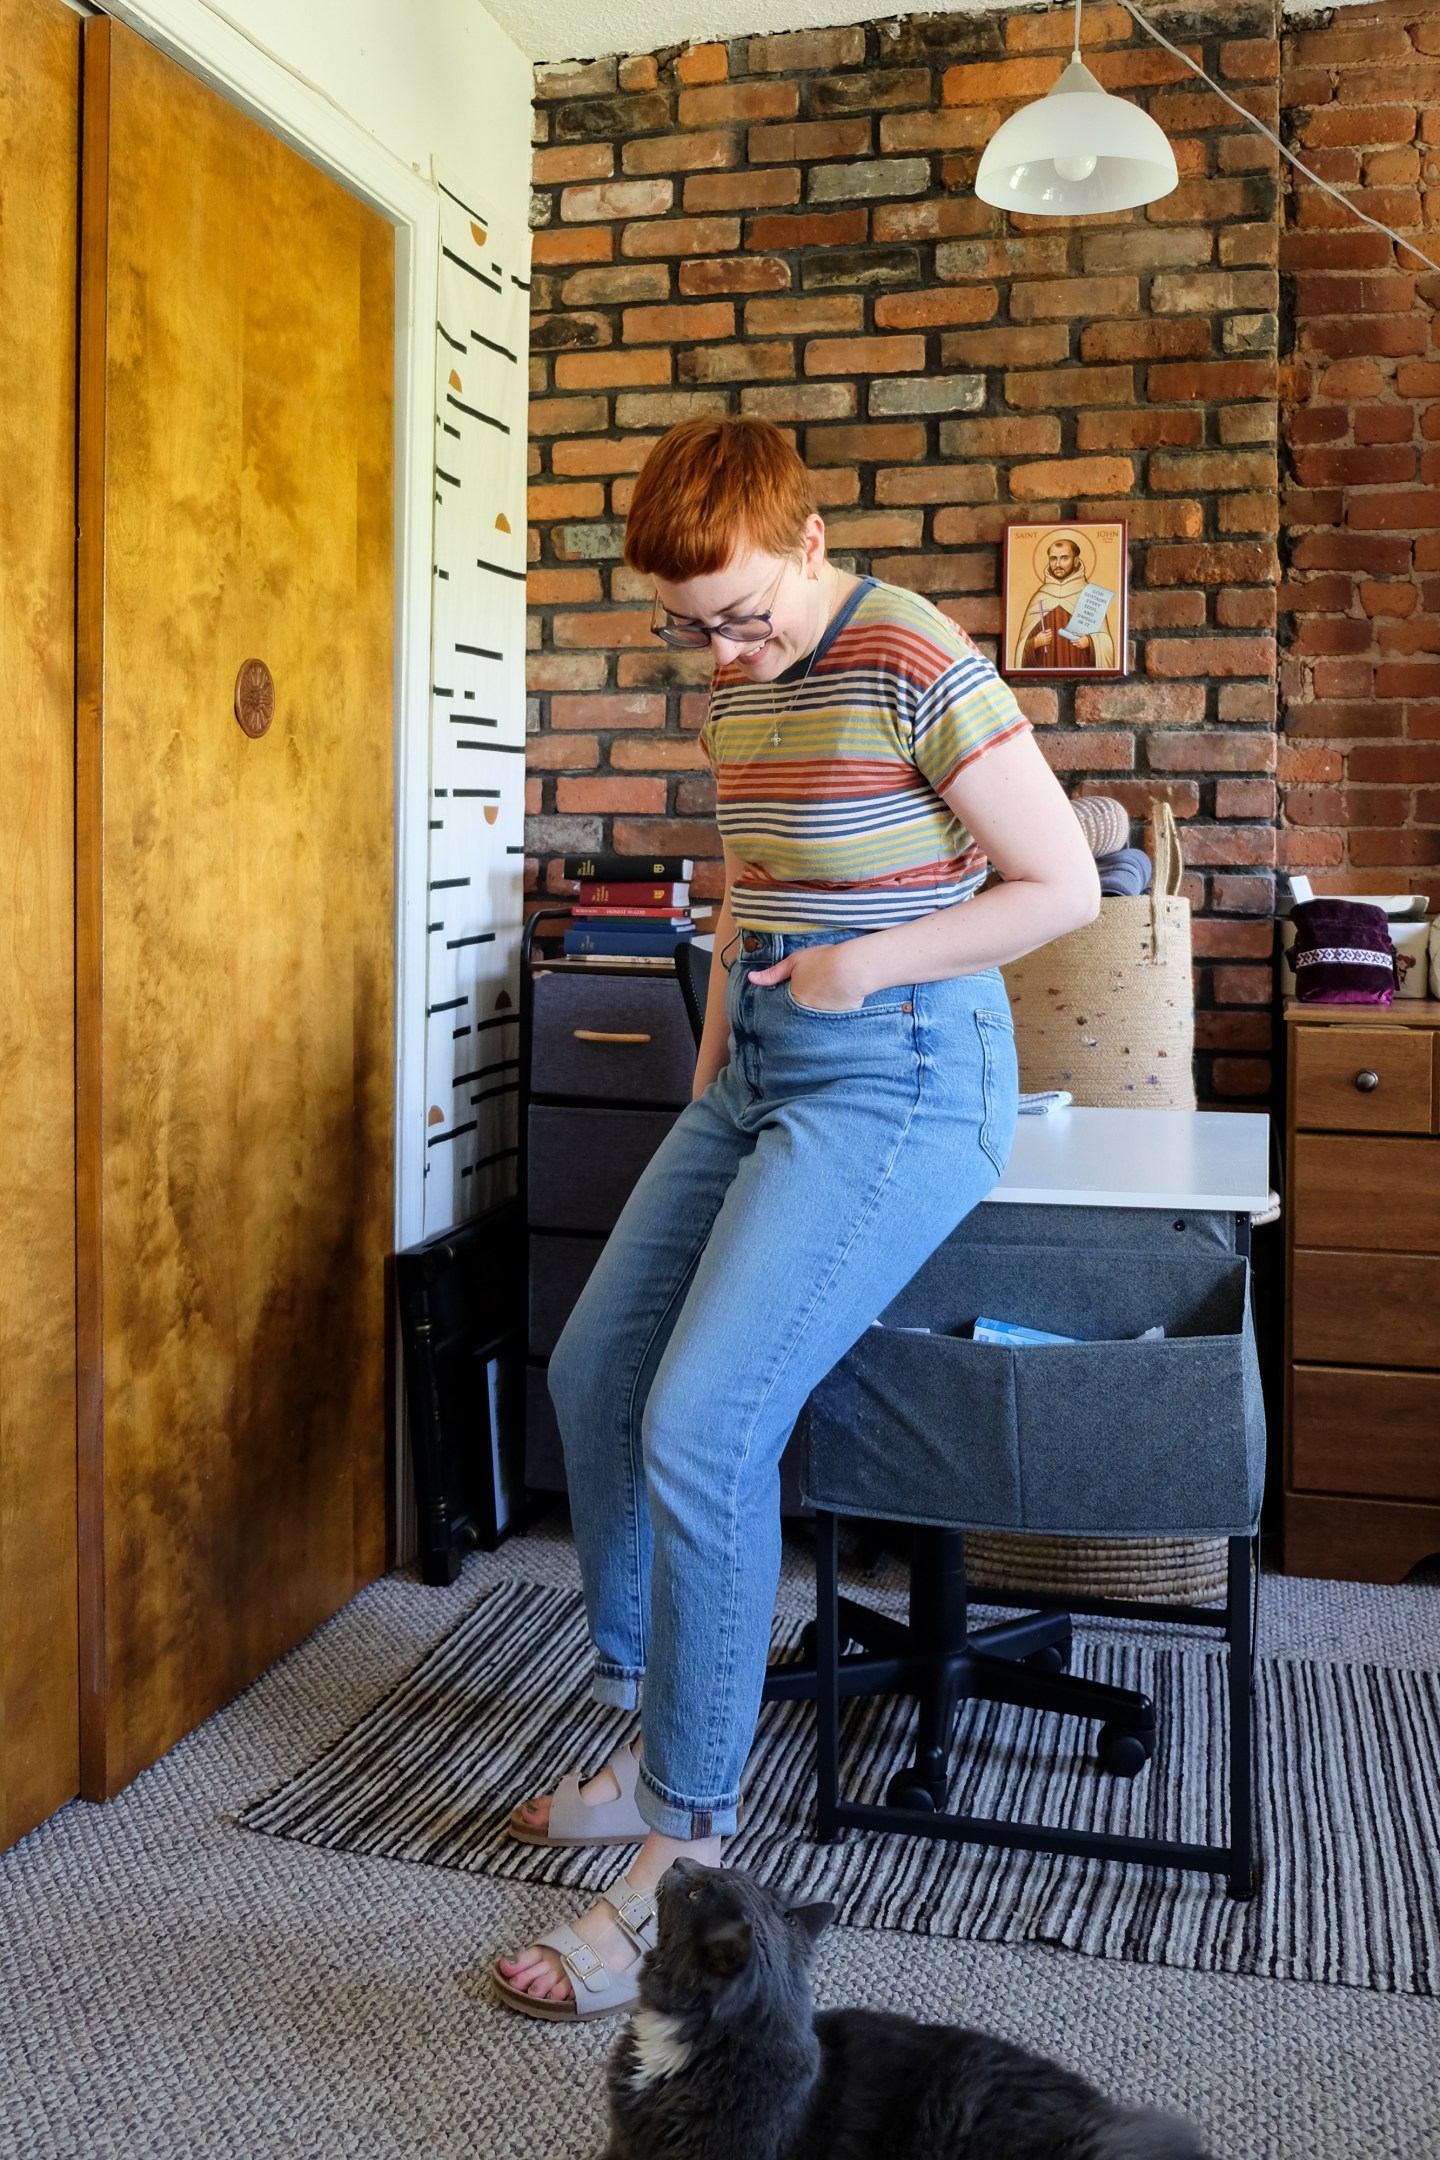 Leah stands in her bedroom wearing a striped shirt, light wash jeans, and sandals - Summer Favorites